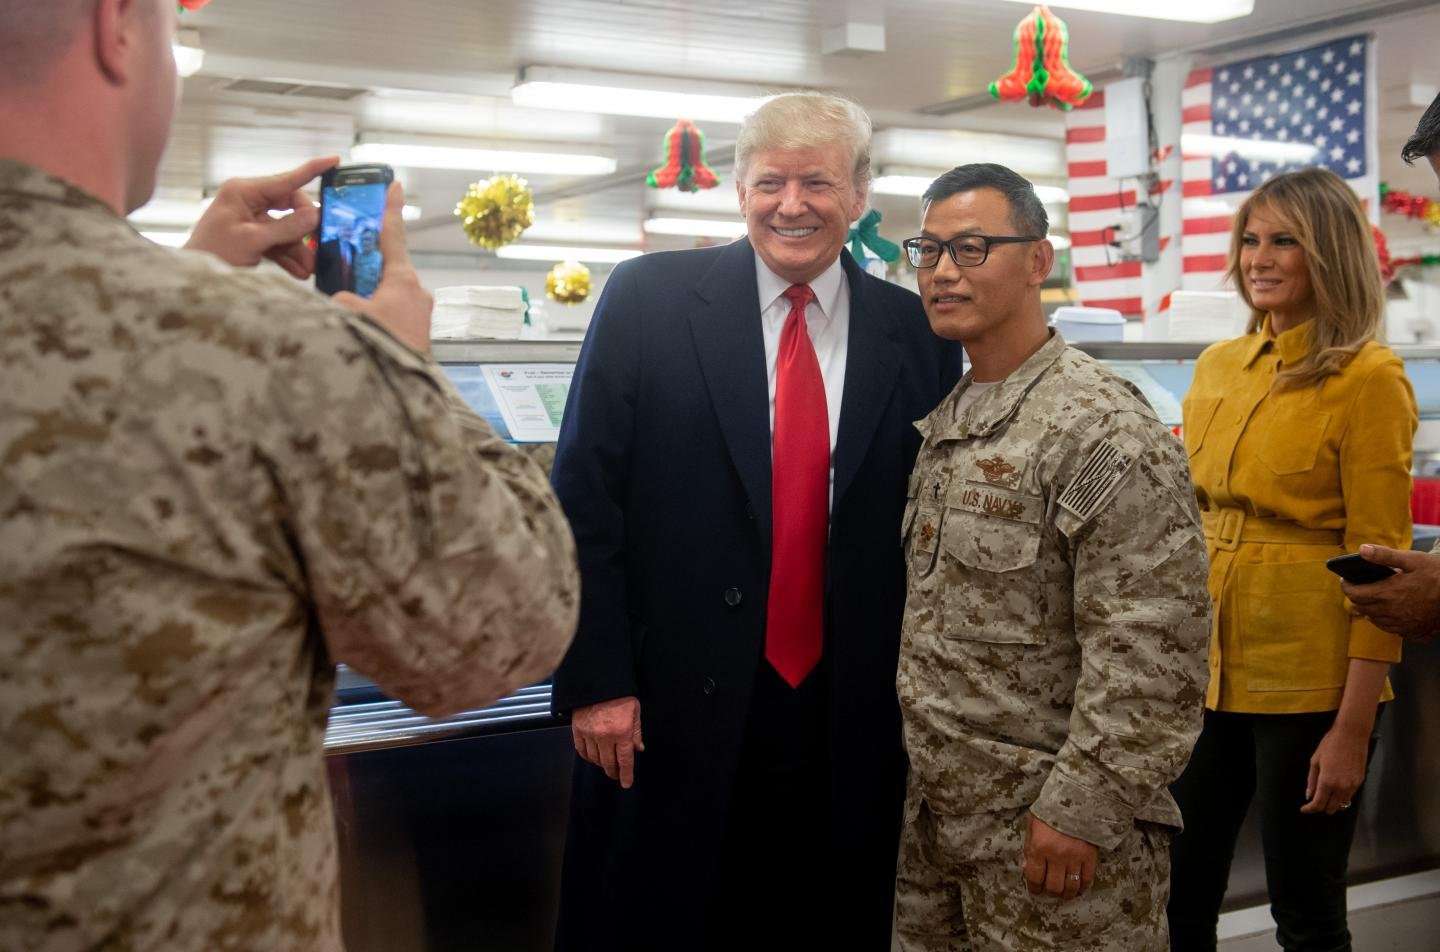 image for Donald Trump Twitter Account Video Reveals Covert U.S. Navy SEAL Deployment During Iraq Visit